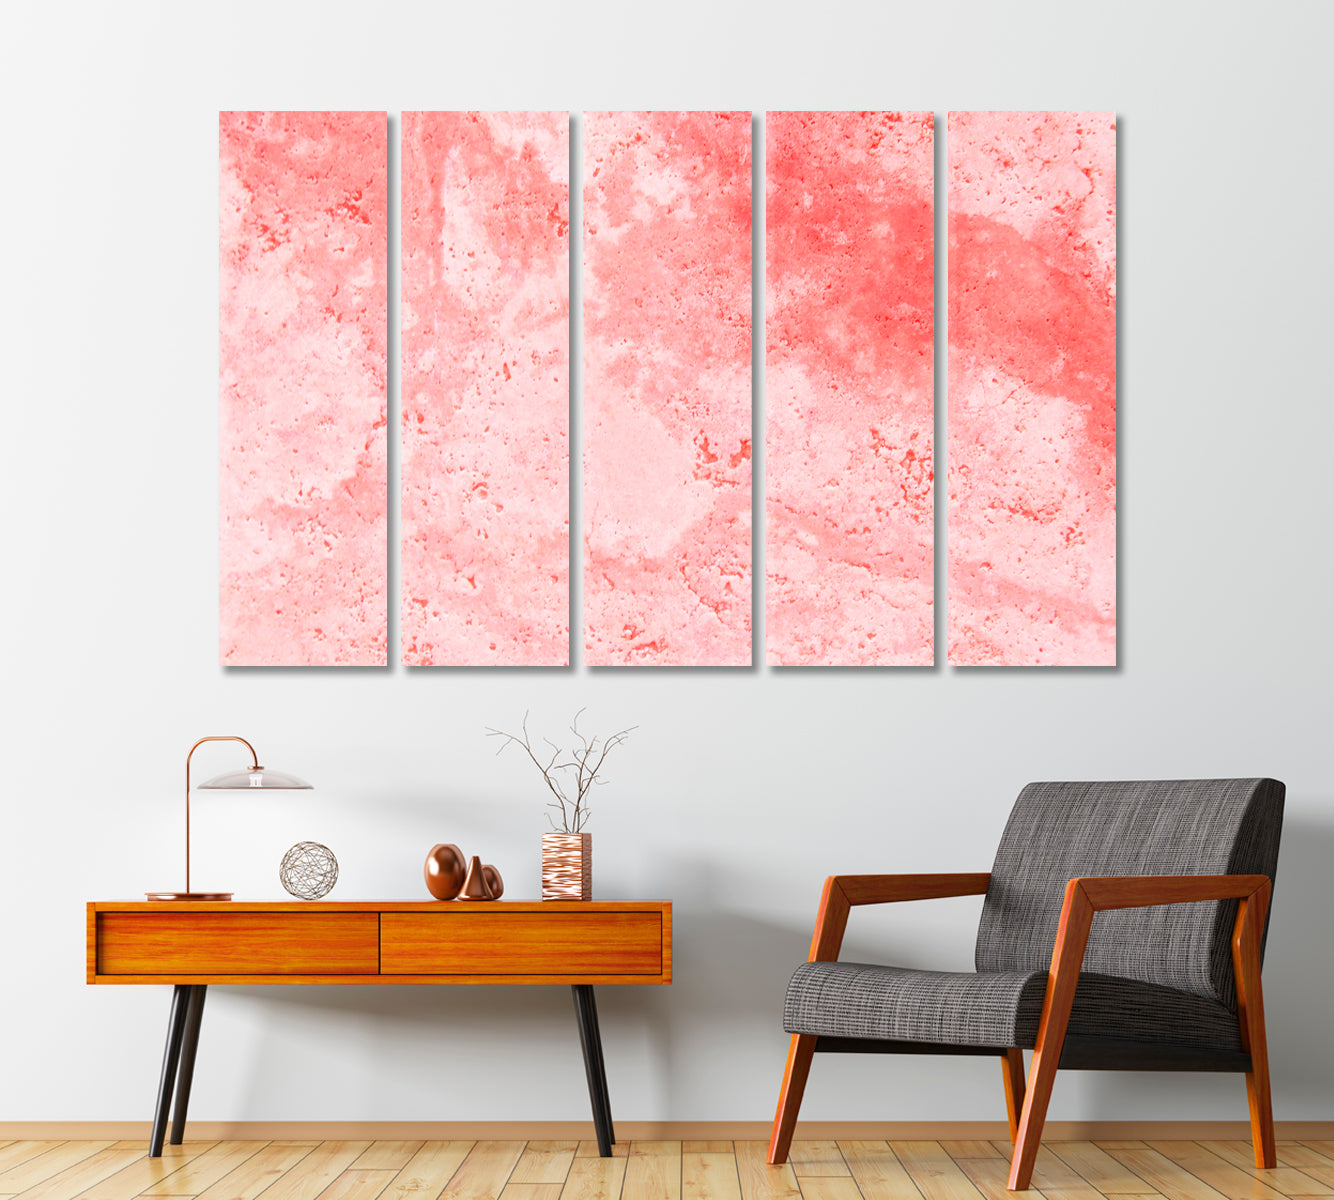 Delicate Pink Marble Abstraction Canvas Print-Canvas Print-CetArt-5 Panels-36x24 inches-CetArt